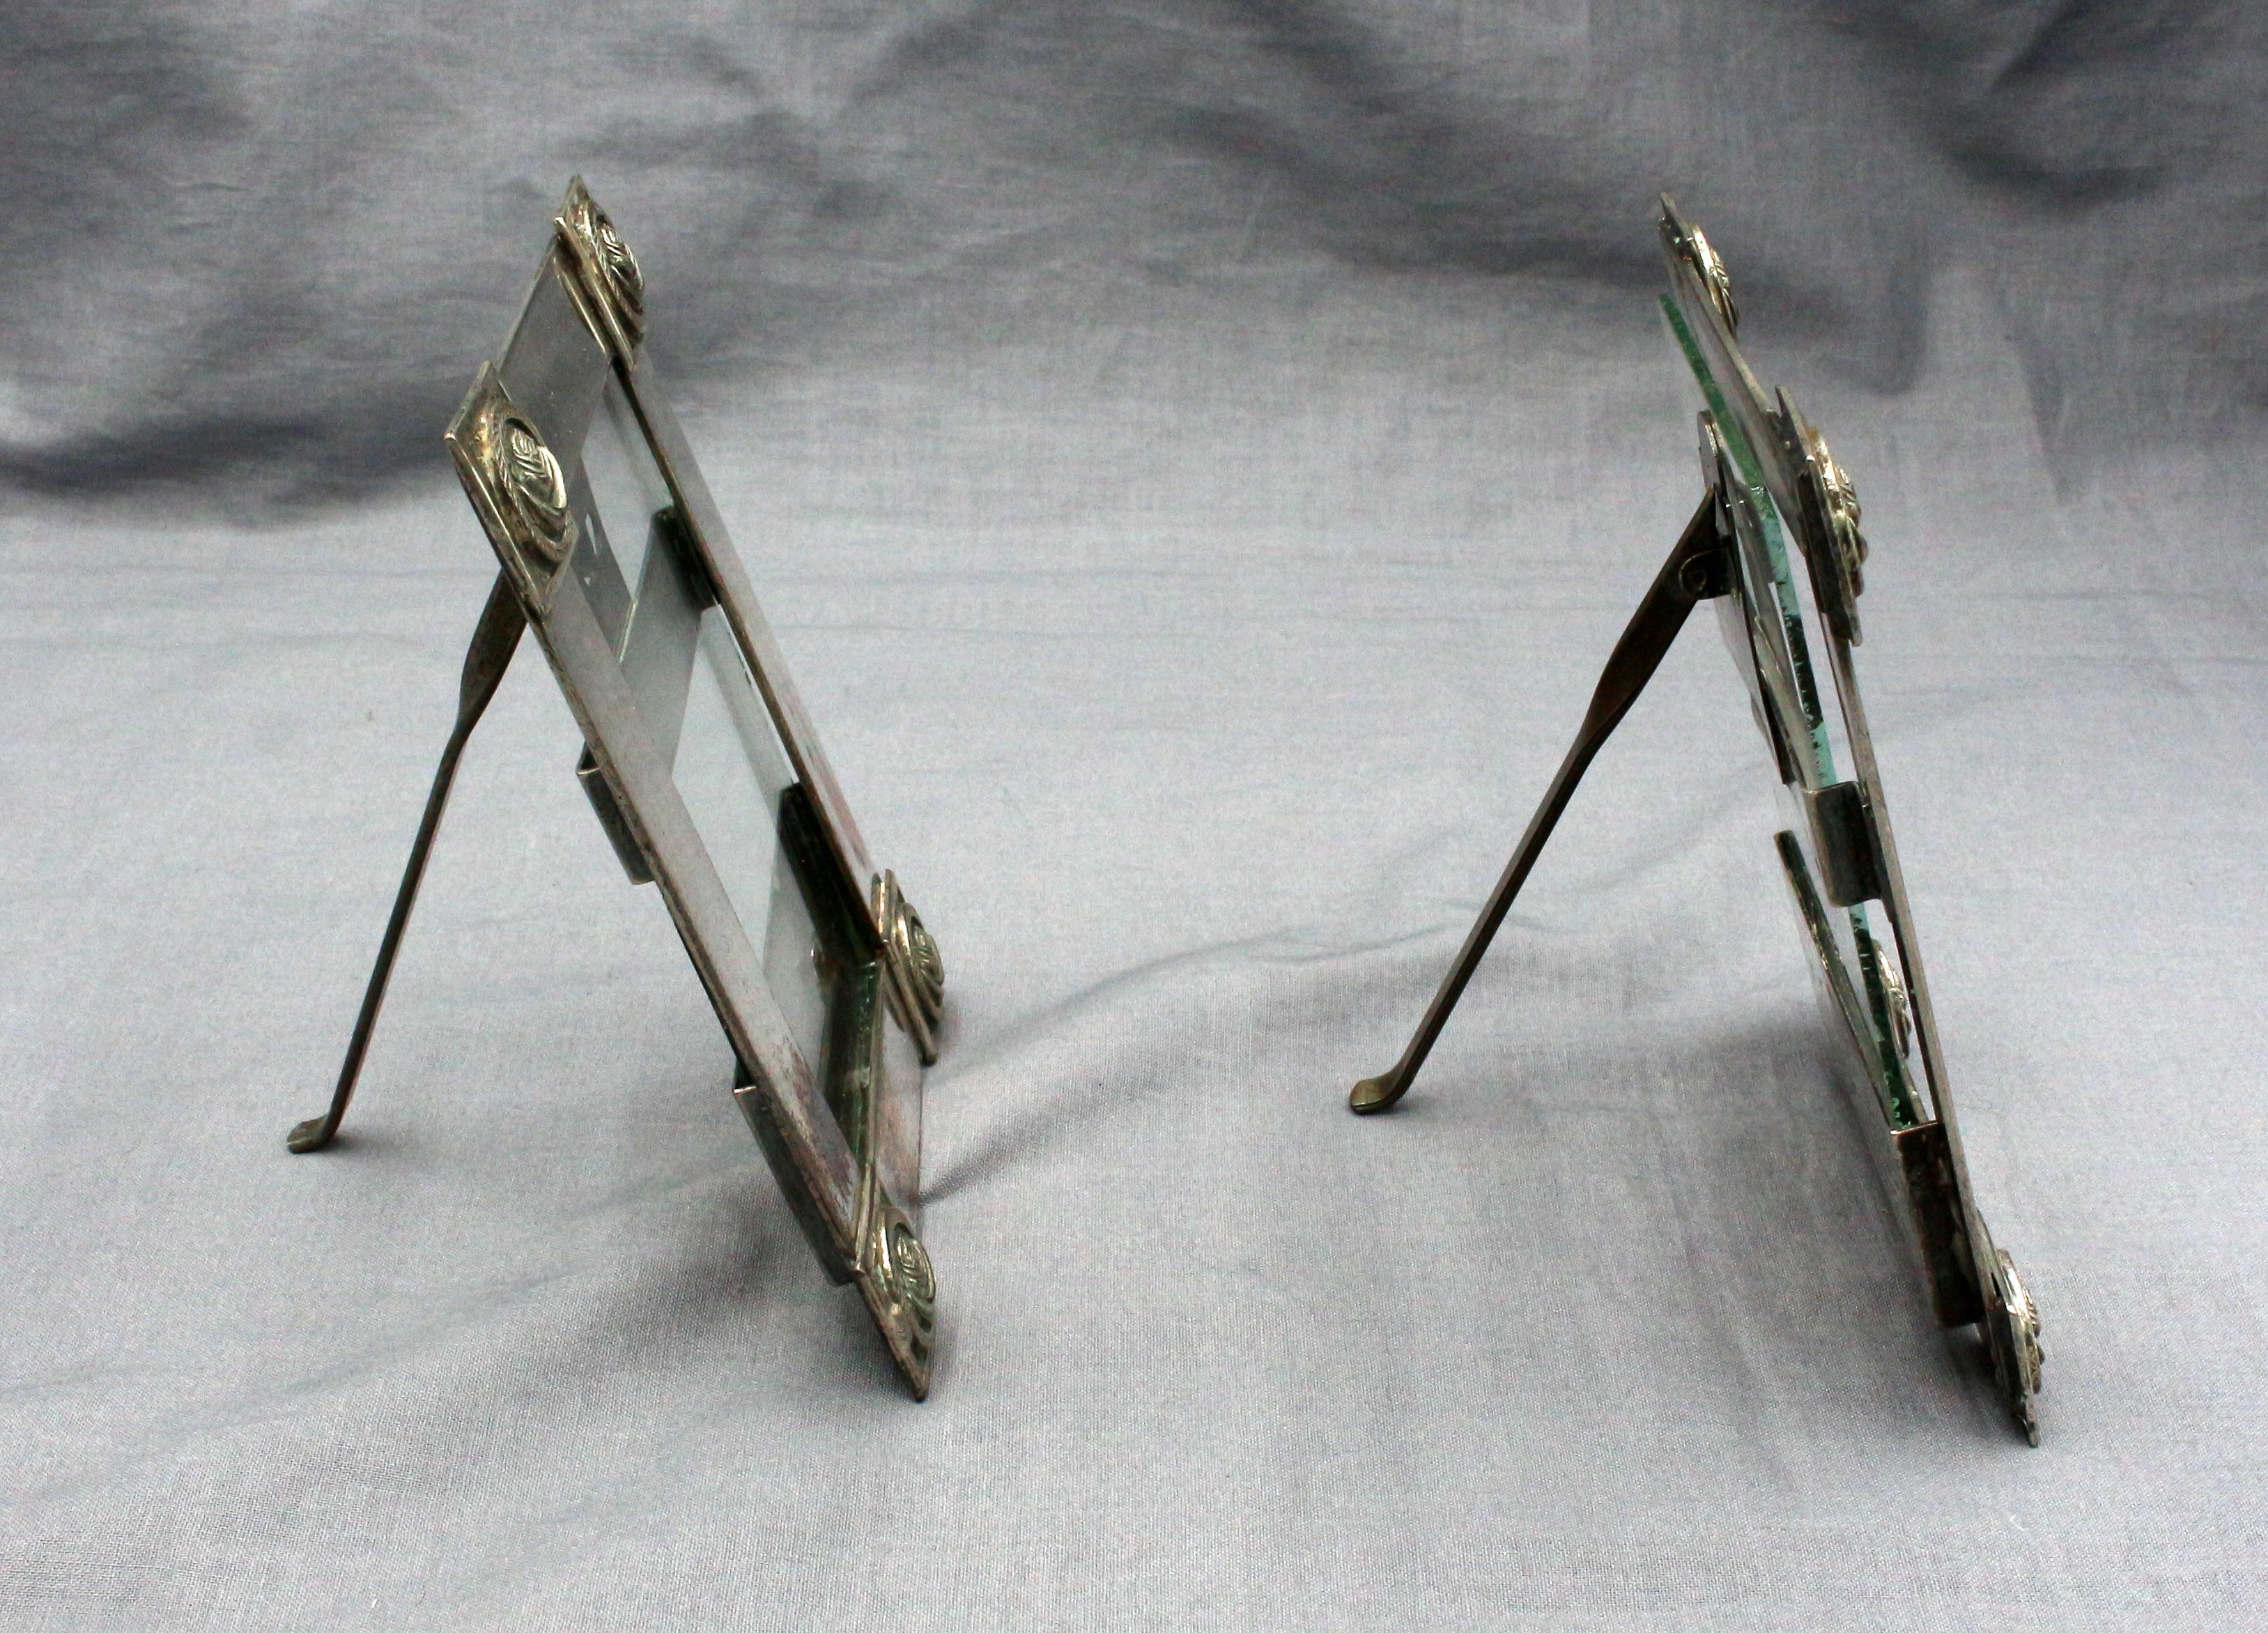 Pair of silver & silver on copper small picture frames with easel stands, Finnish, c.1880-1920. Arts & Crafts, hand made. The corner bosses are cast solid silver. Pivot pins replaced.
5